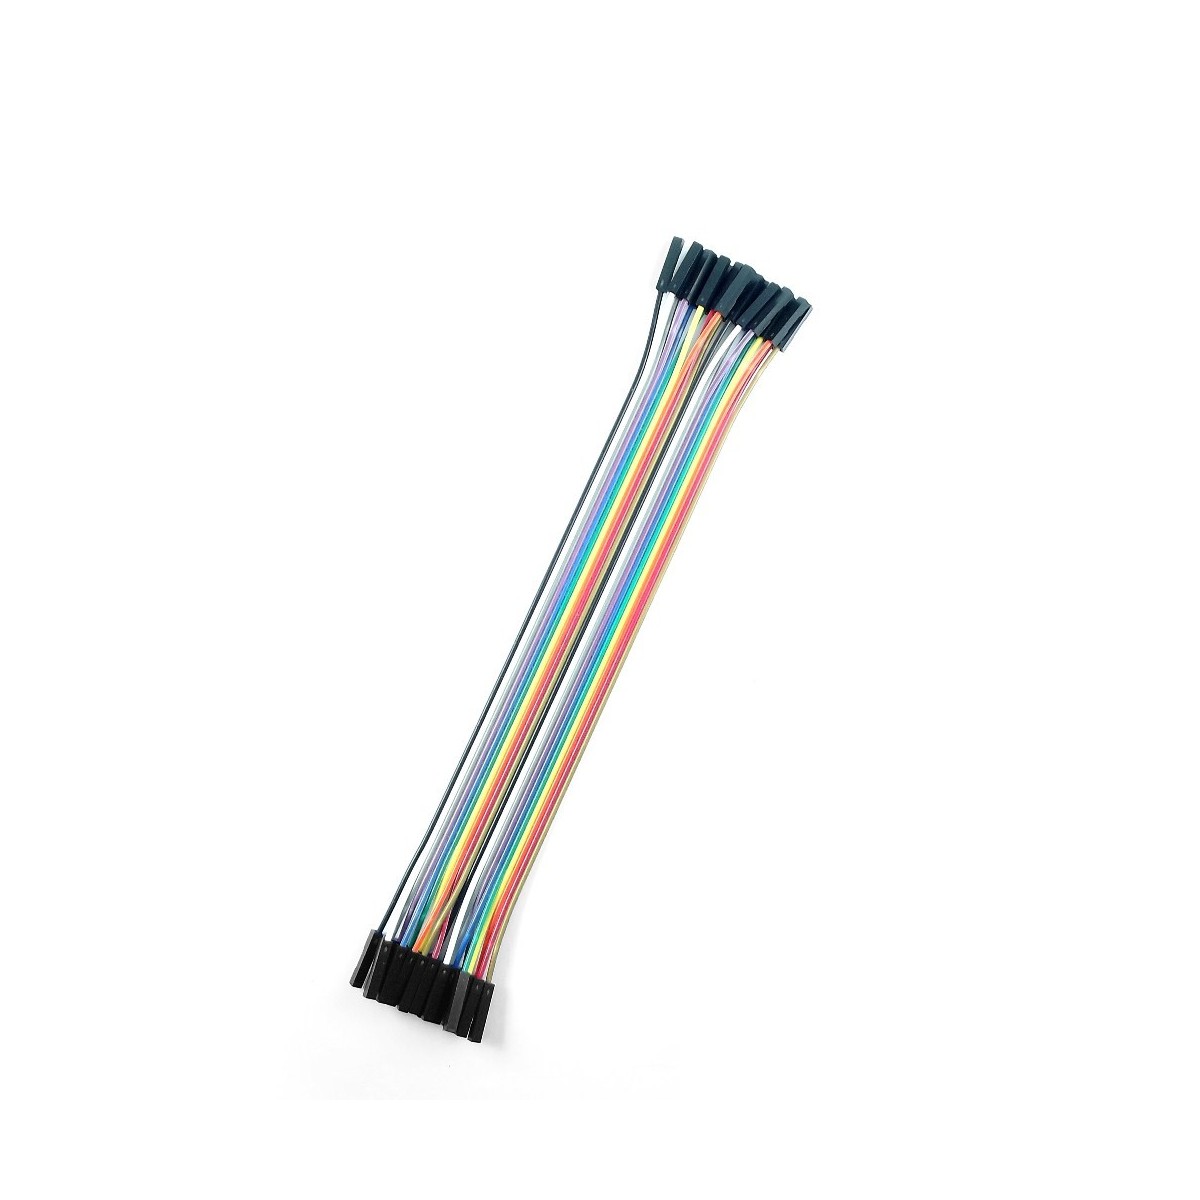 CABLE DUPONT JUMPER HEMBRA-HEMBRA 20CM PACK 10 UNIDADES - Electronica Plett